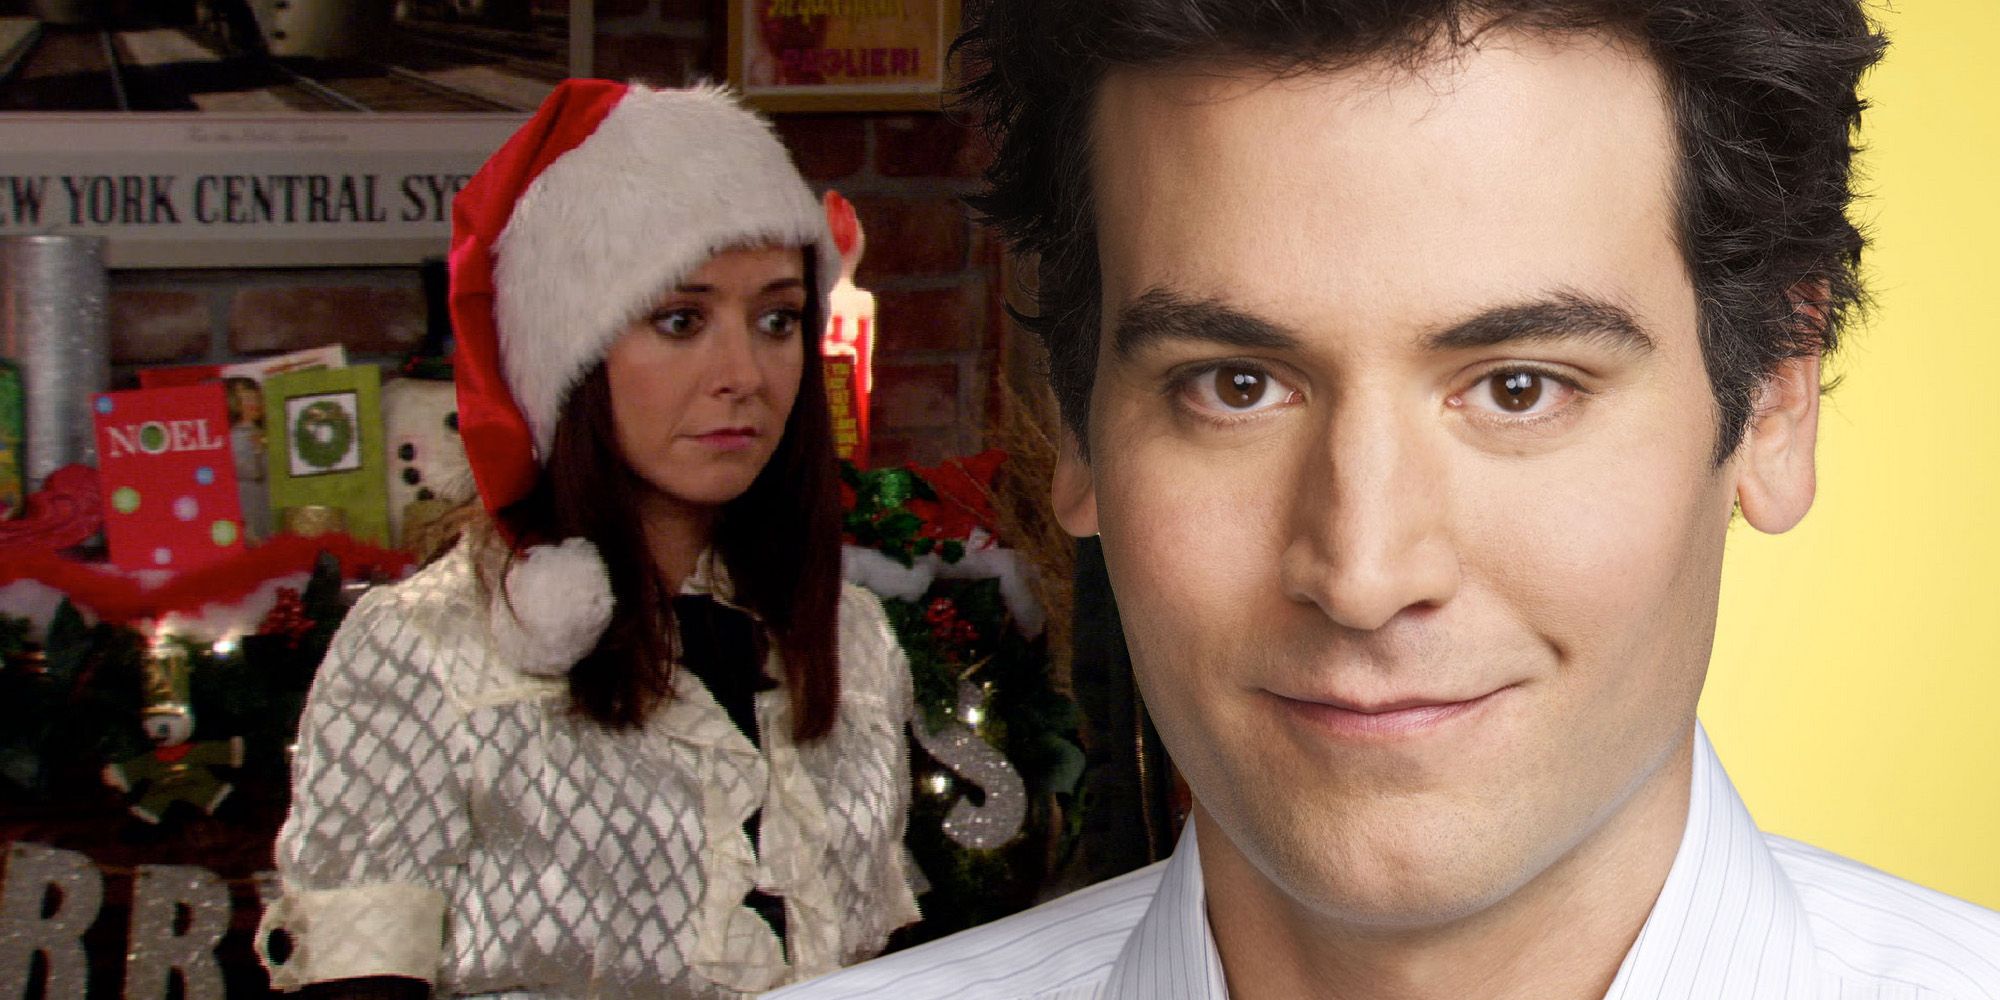 How I met your mother Christmas episodes ted mosby lilly